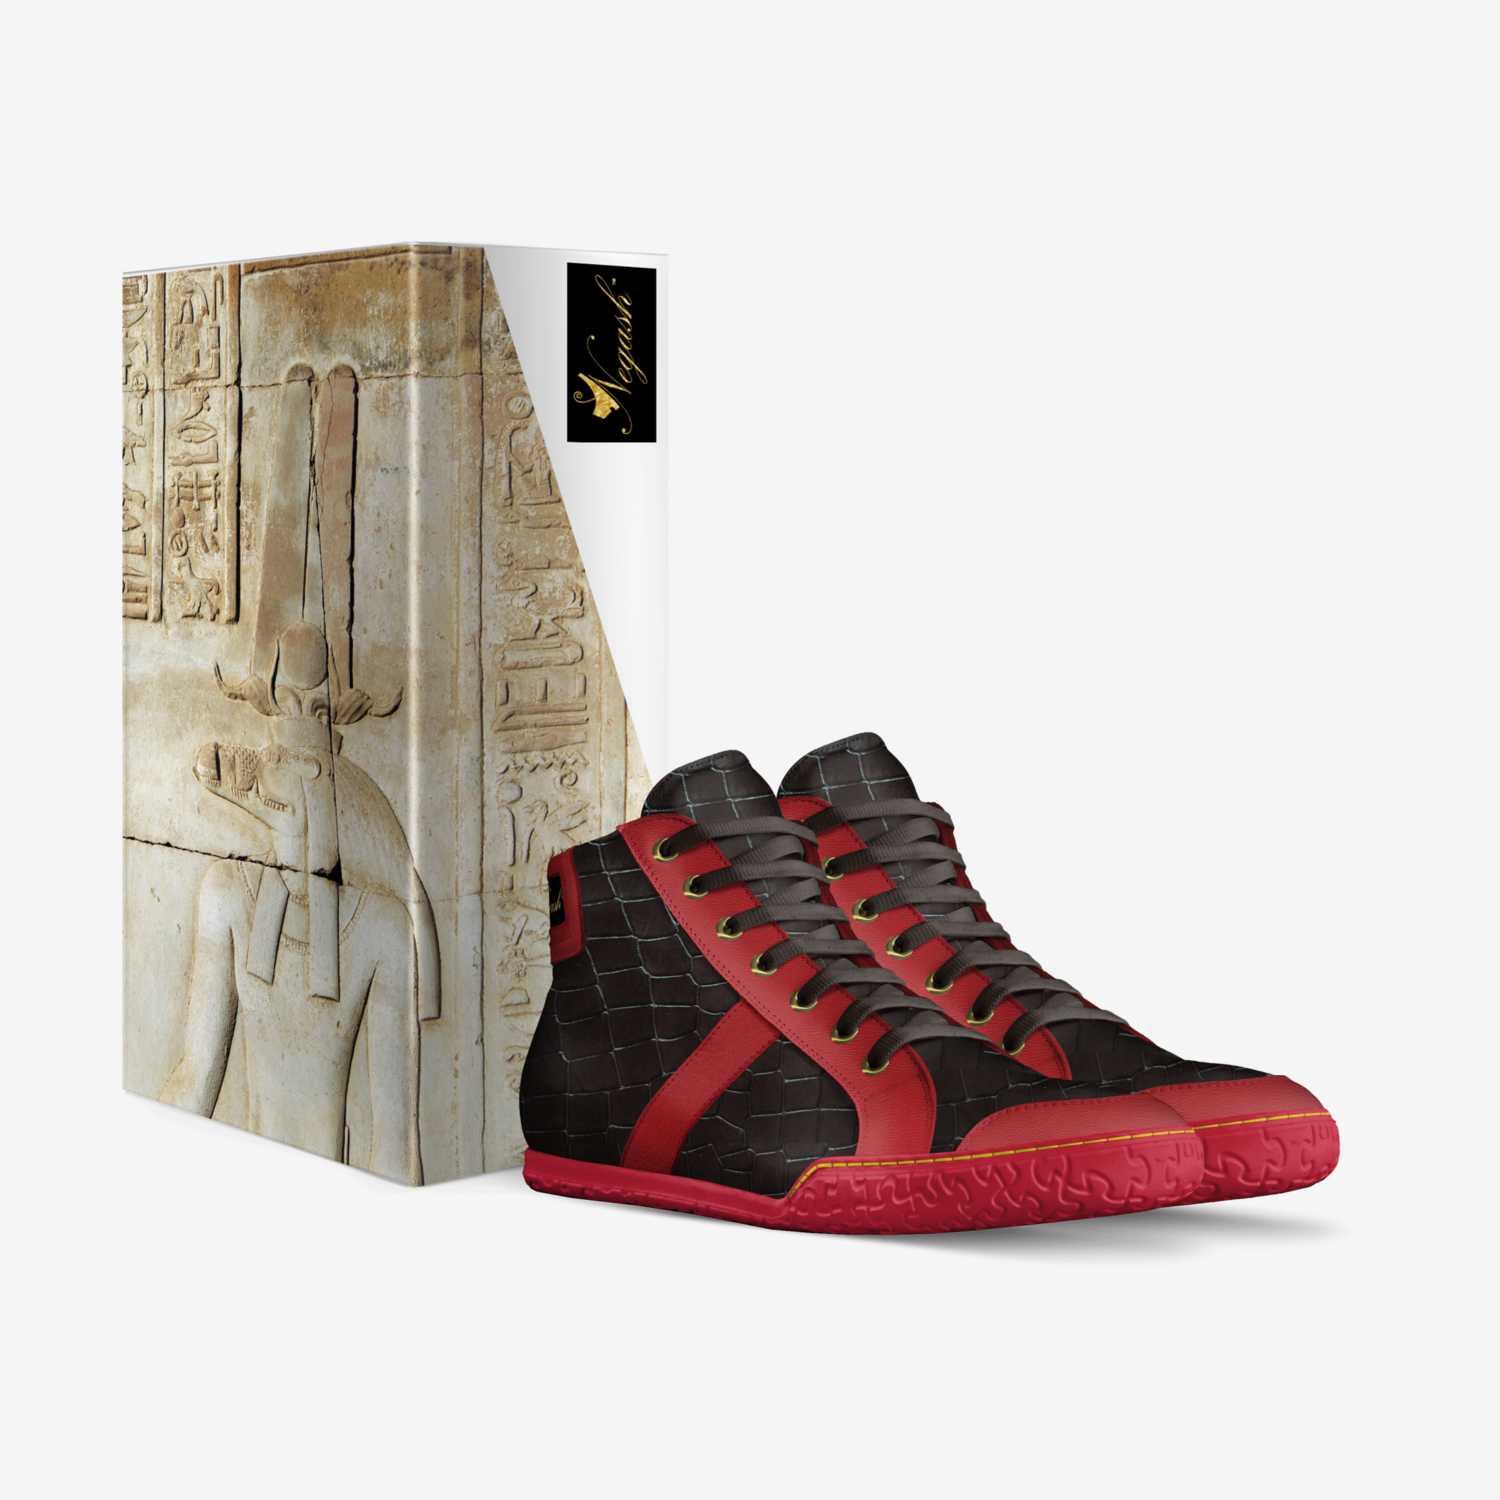 Negash Sobek Rosso custom made in Italy shoes by Rocklin Negash | Box view